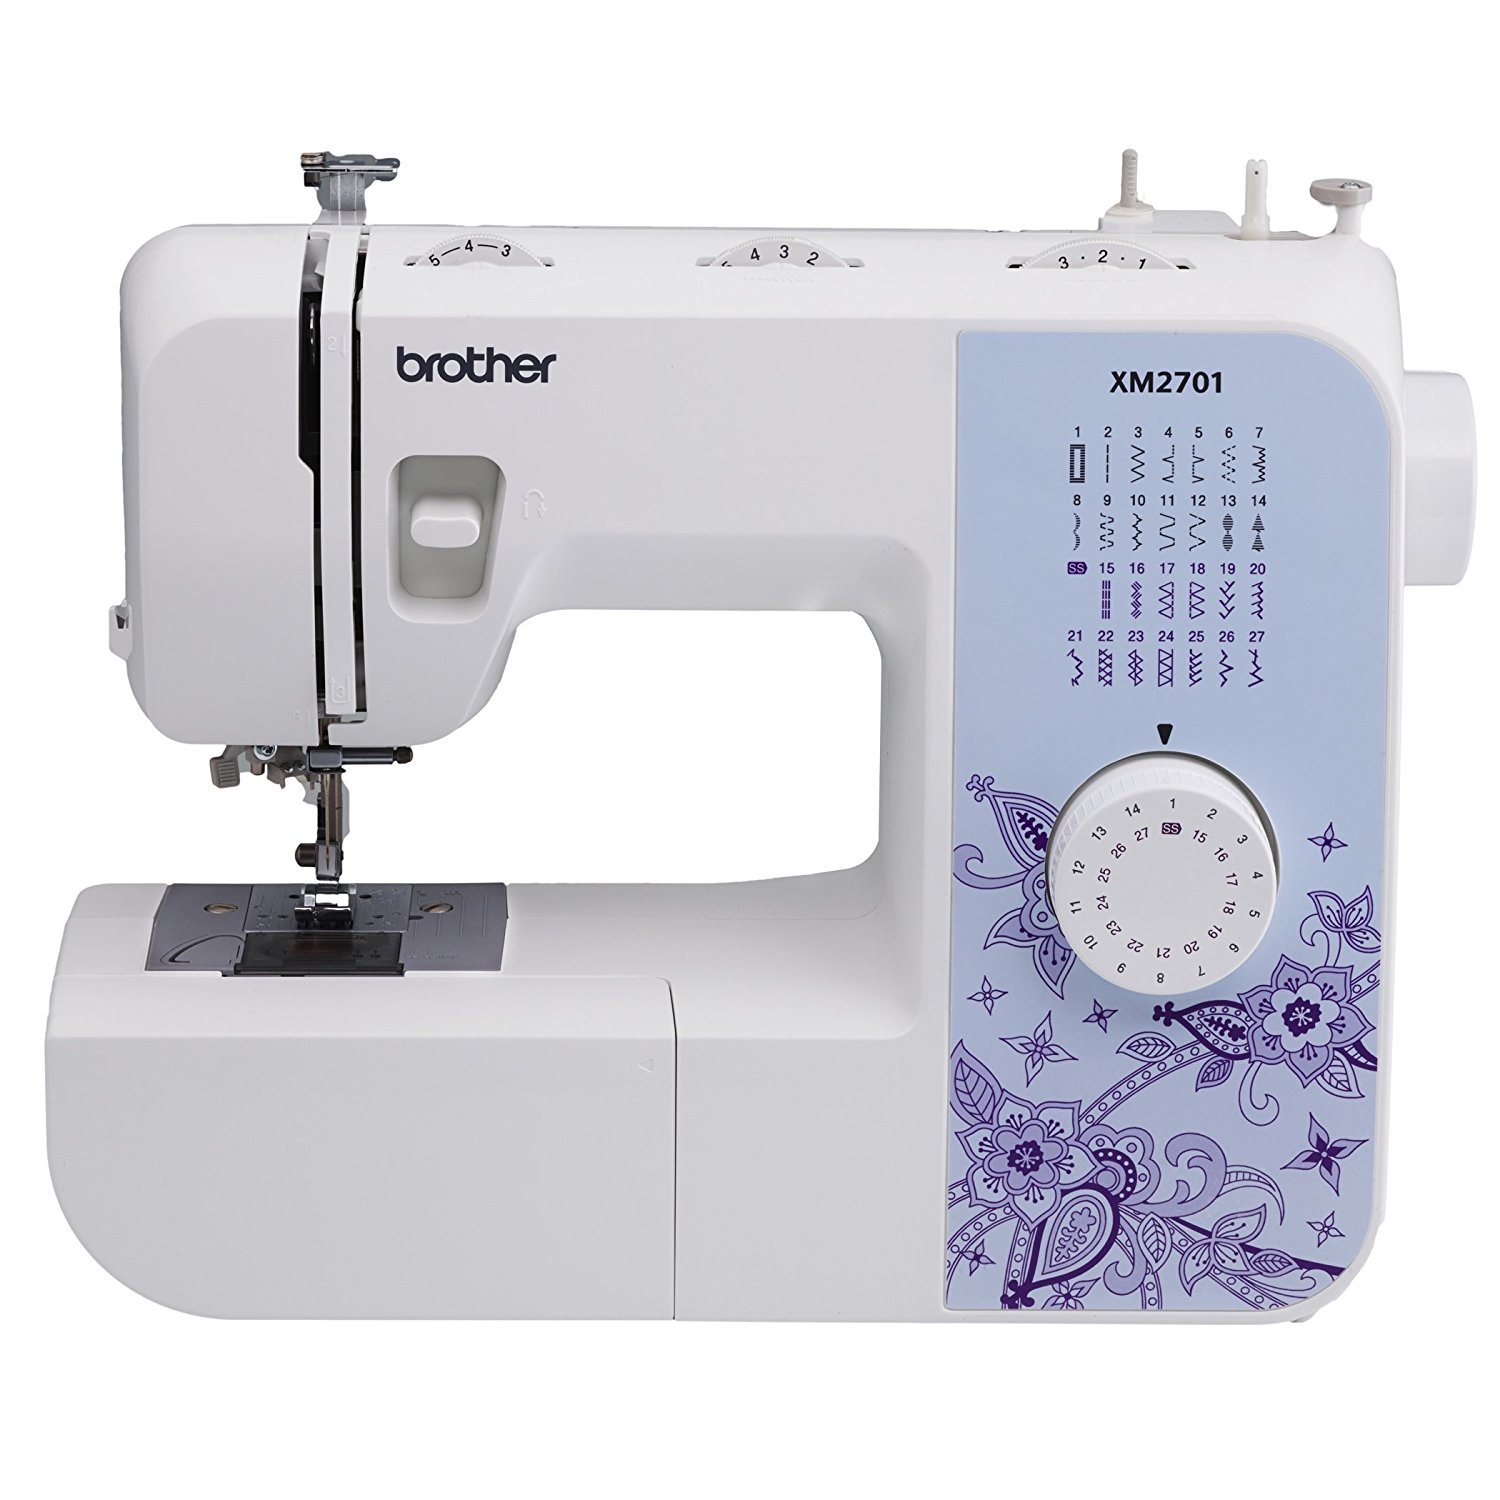 Brother Sewing Machine Embroidery Patterns Top 10 Brother Sewing Embroidery Machines Aug 2019 Reviews